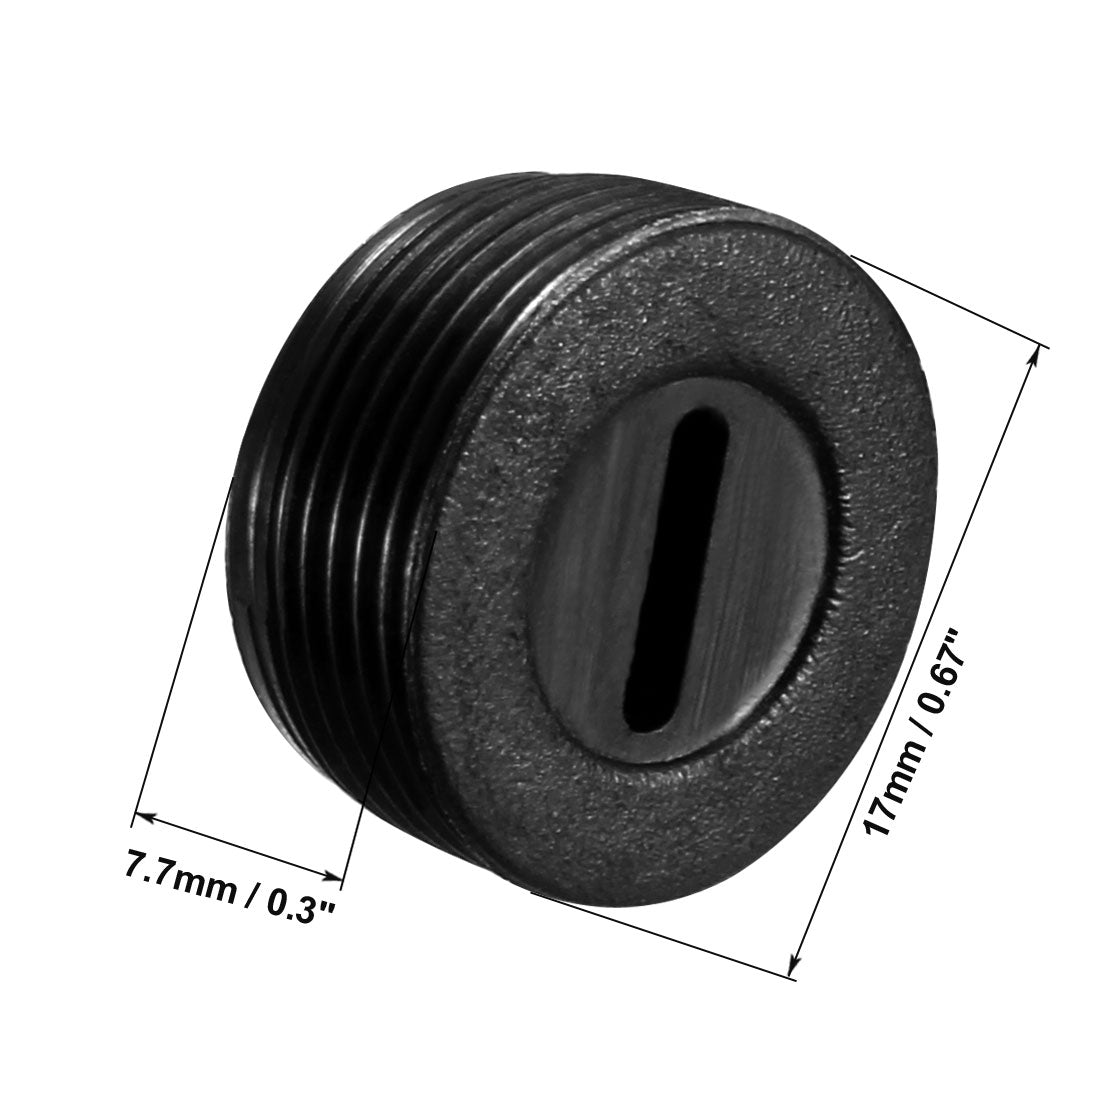 uxcell Uxcell Carbon Brush Holder Caps 17mm O.D. 9.5mm I.D. 7.7mm Thickness Motor Brush Cover Plastic Fitting Thread Black 2pcs